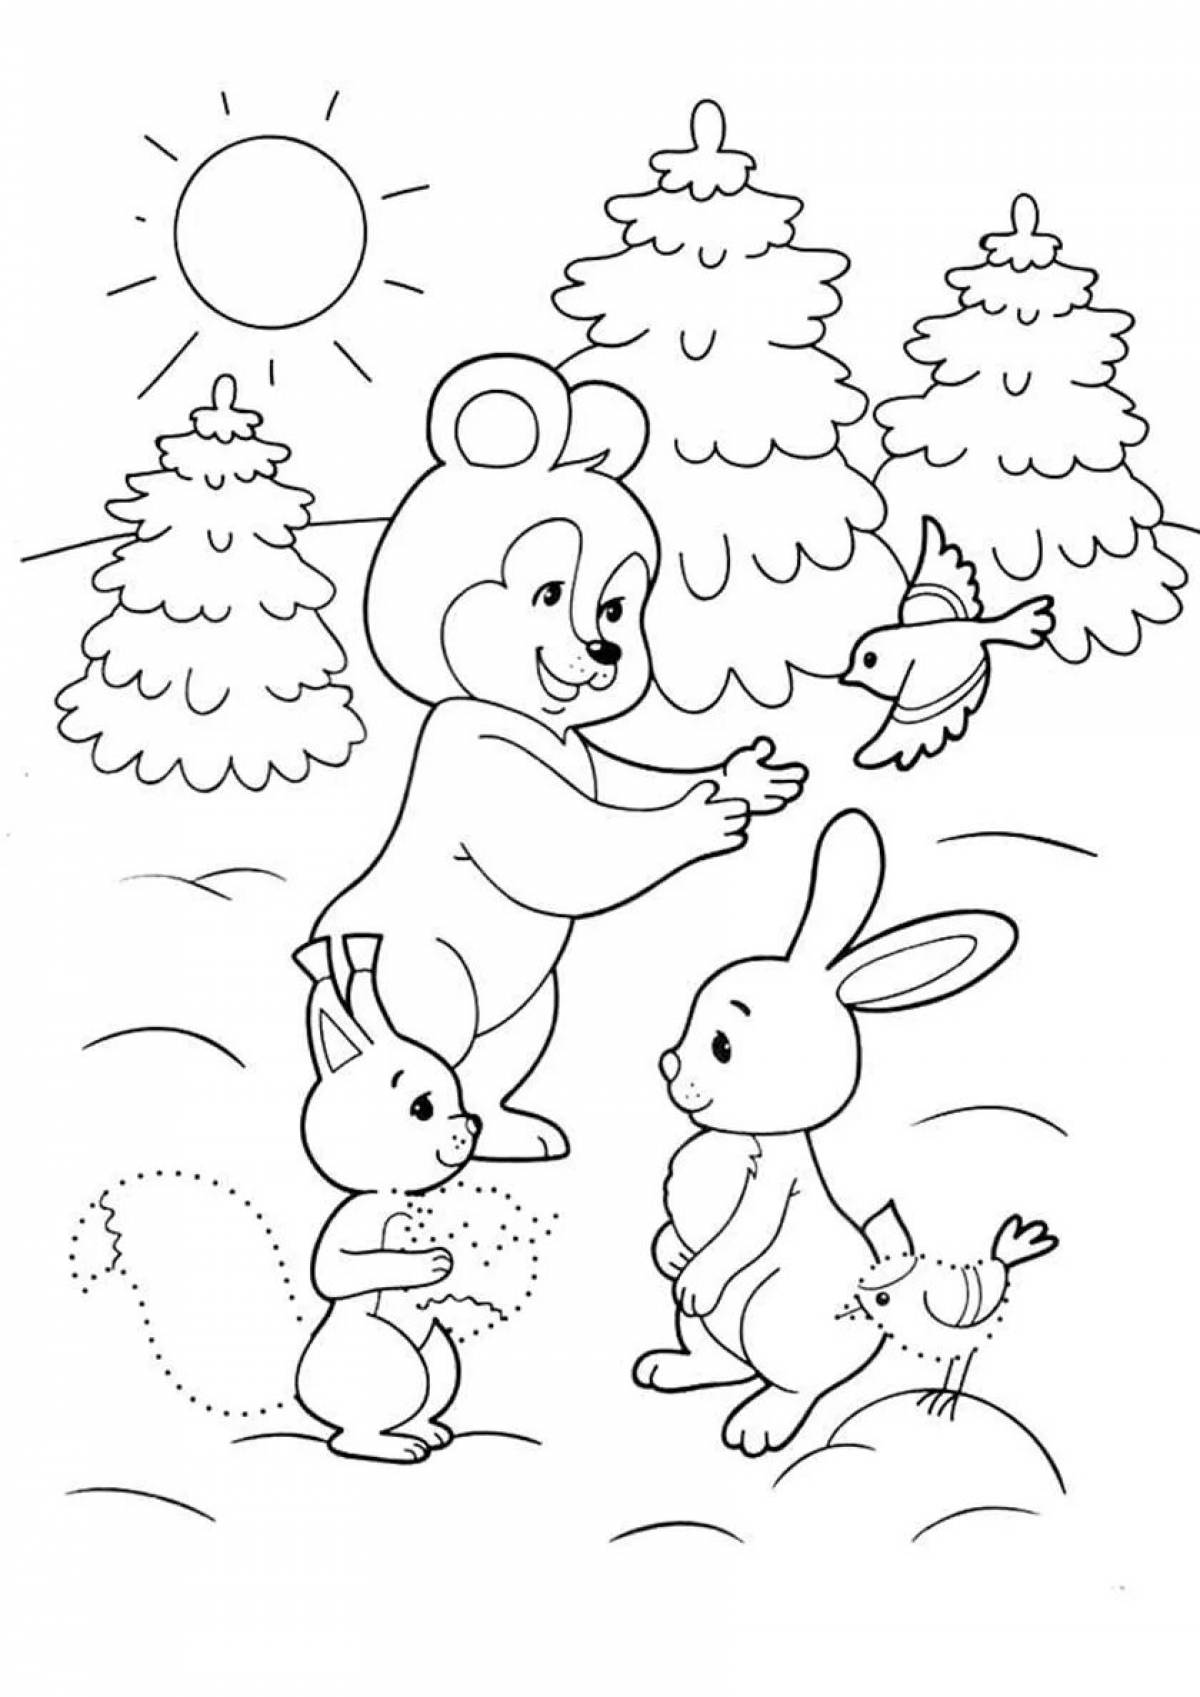 Glowing winter forest coloring book for children 6-7 years old